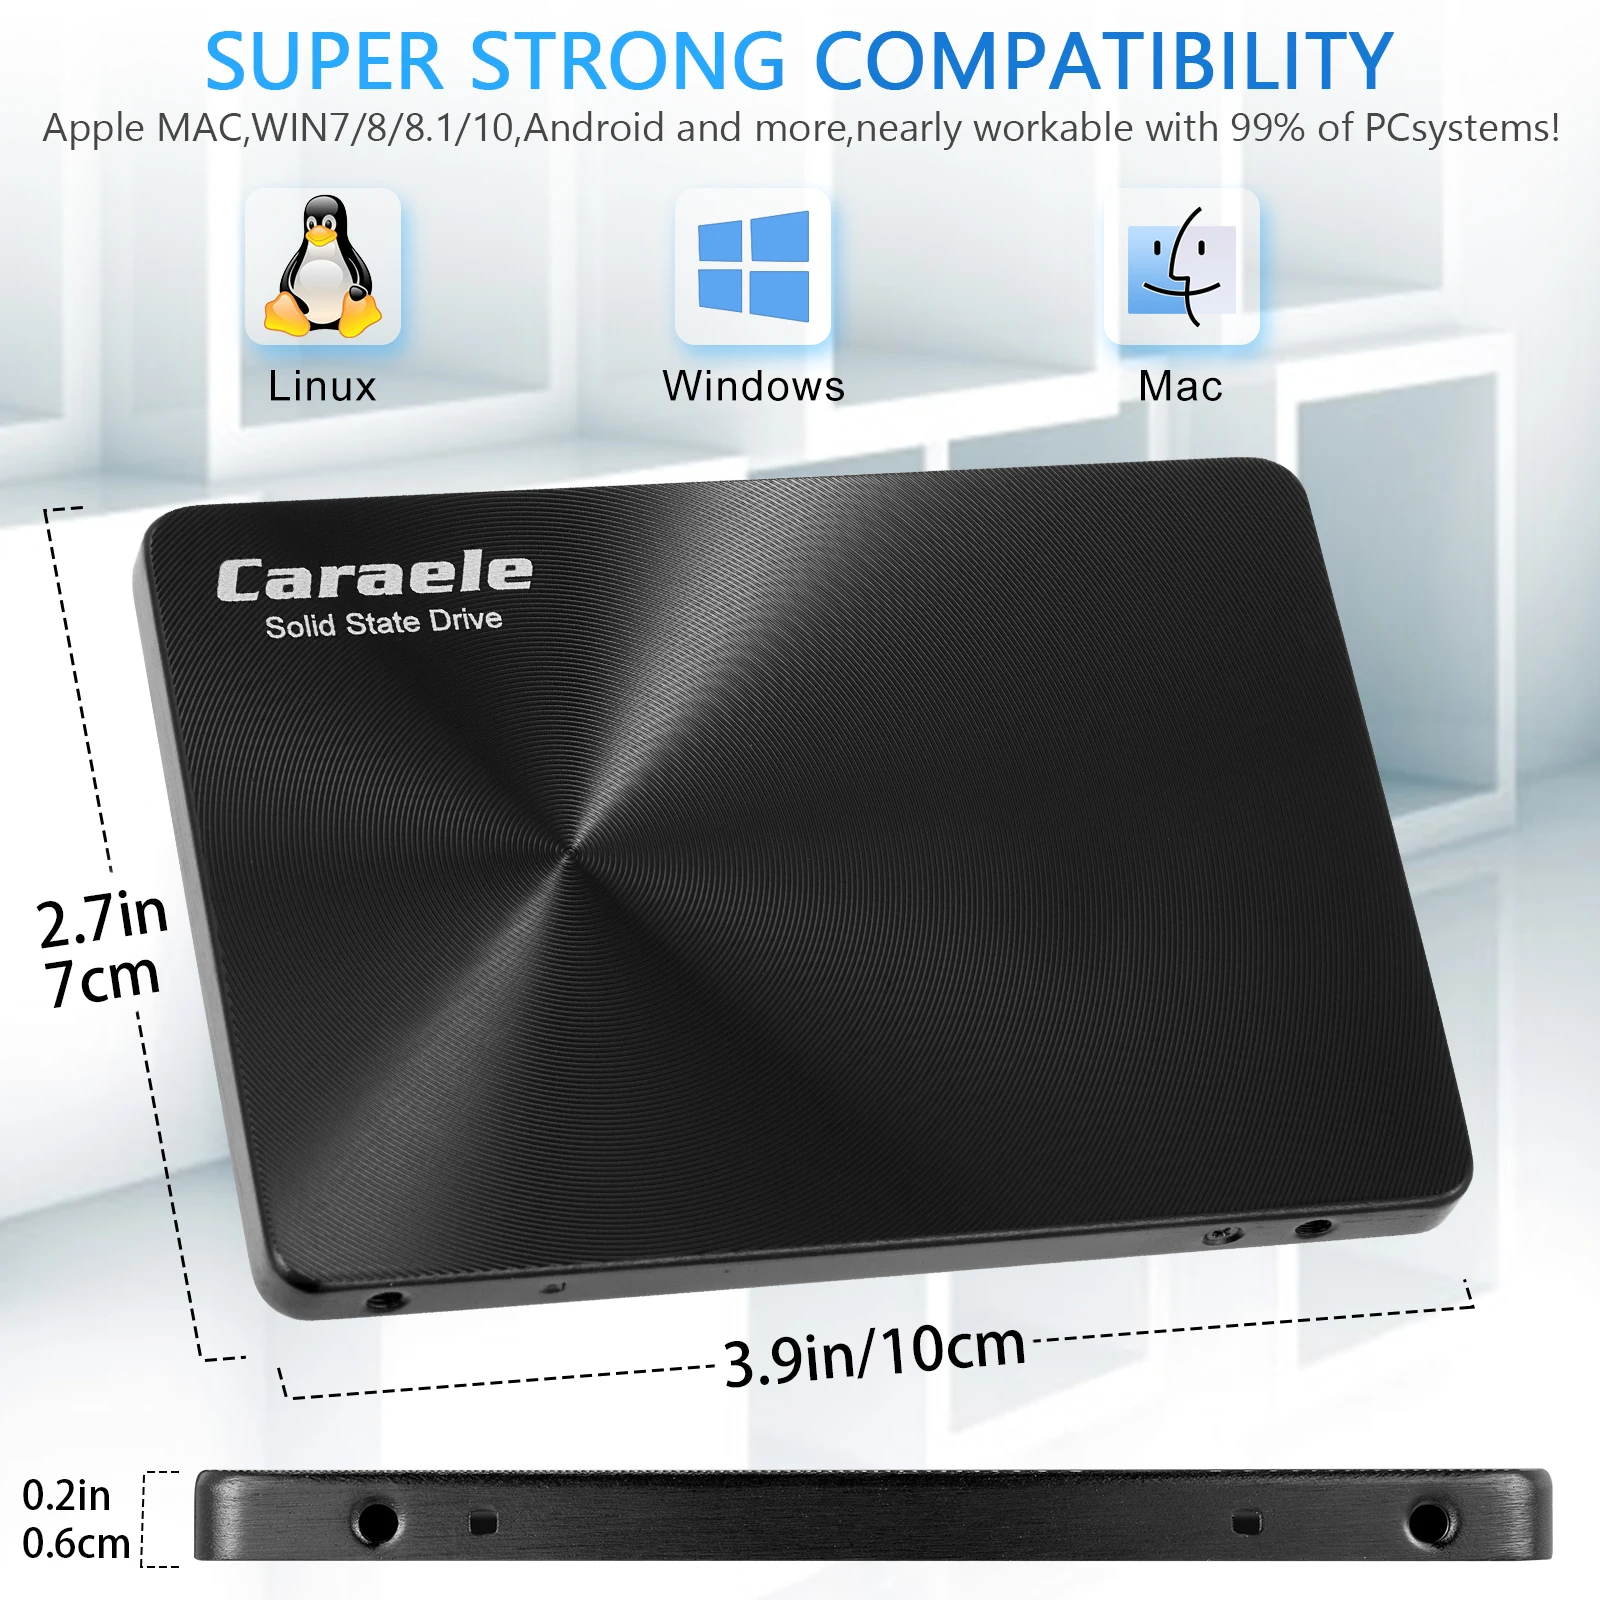 Caraele K600 2.5 SATA III SSD HARD DRIVE SSD 512GB 1TB Internal Solid State Drive Storage Devices for computer laptops desktop enlarge